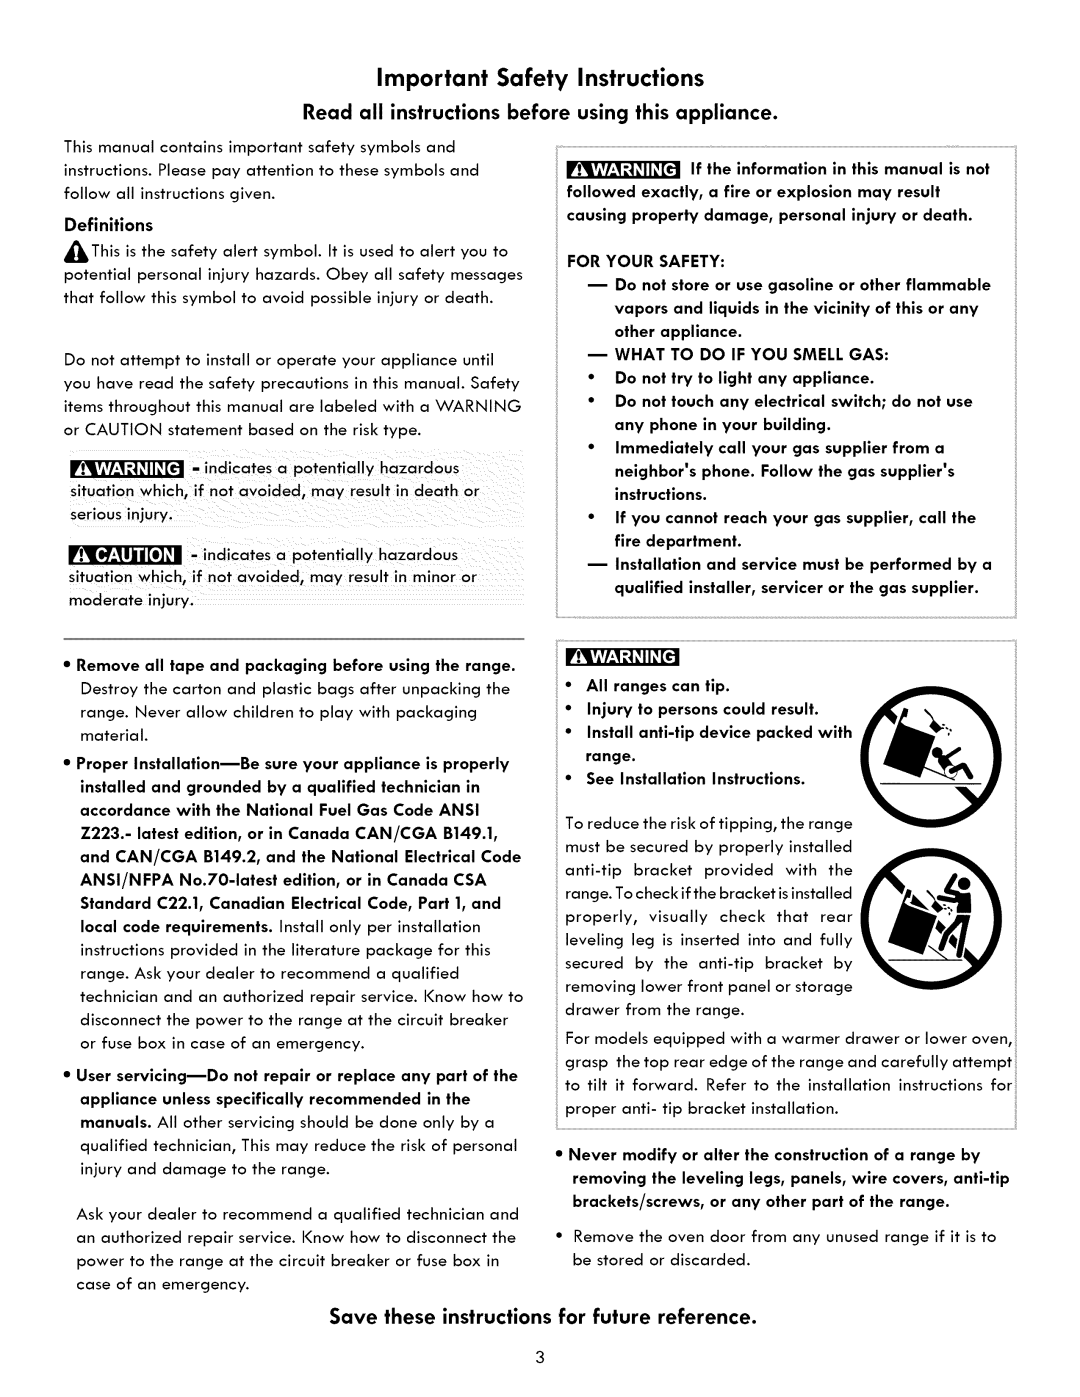 Kenmore 790. 7260 manual Important Safety Instructions, Read all instructions before using this appliance, Definitions 